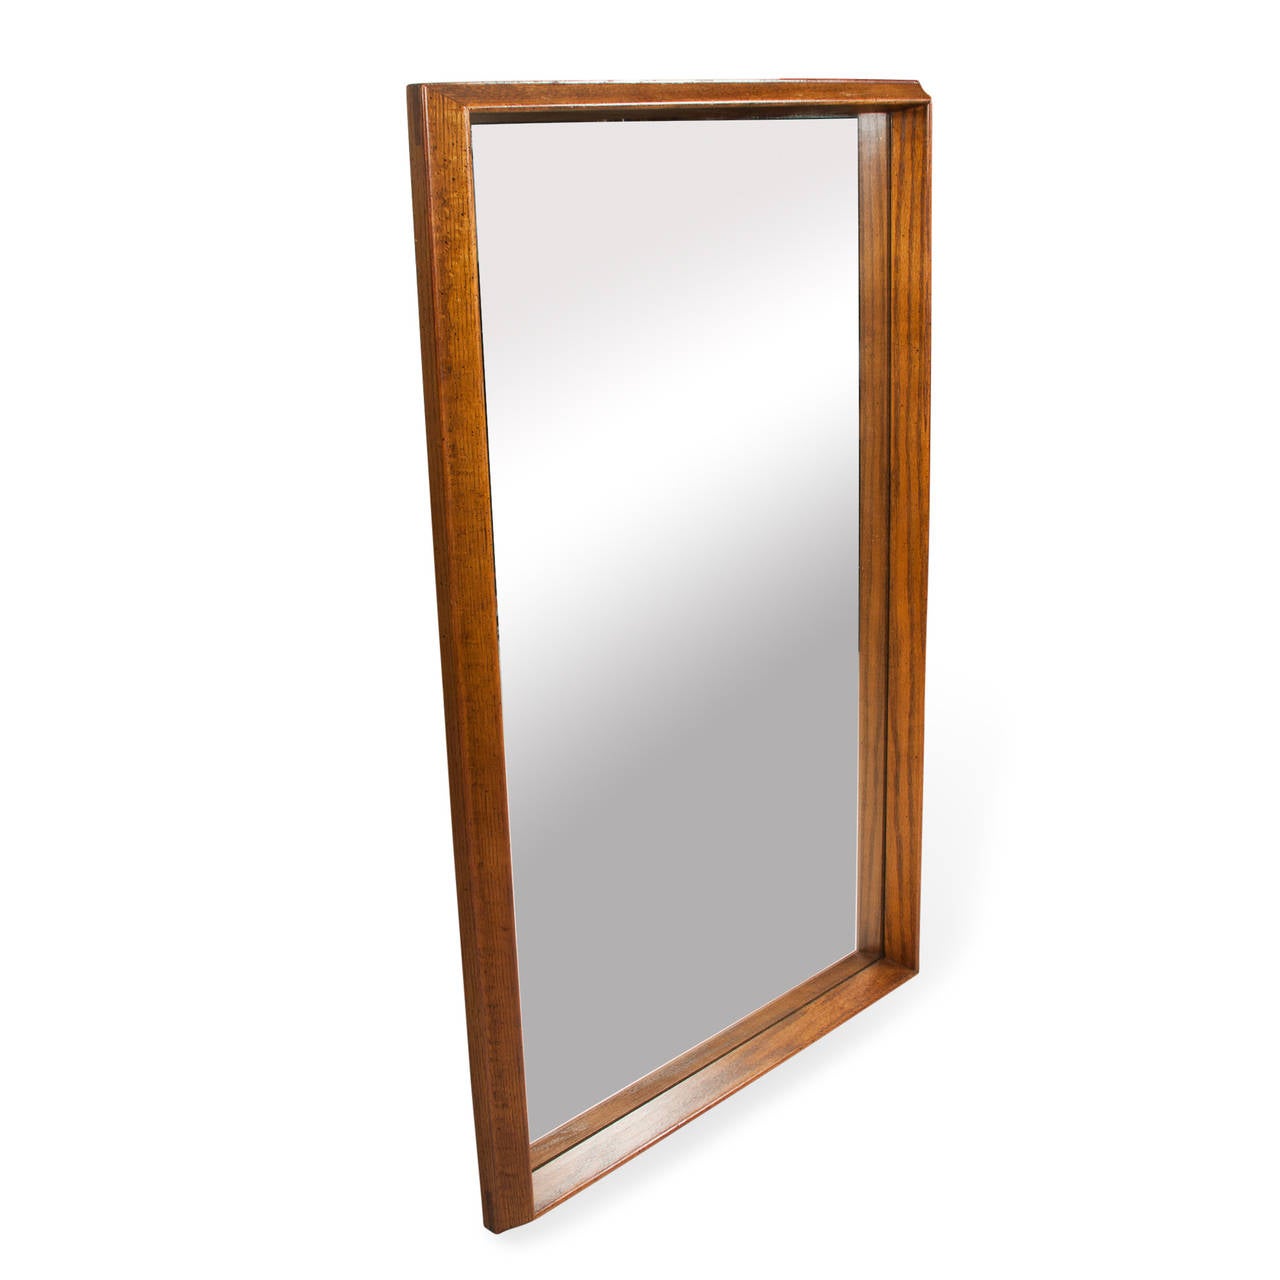 Dark Maple Stained Wall Mirror In Excellent Condition For Sale In Brooklyn, NY